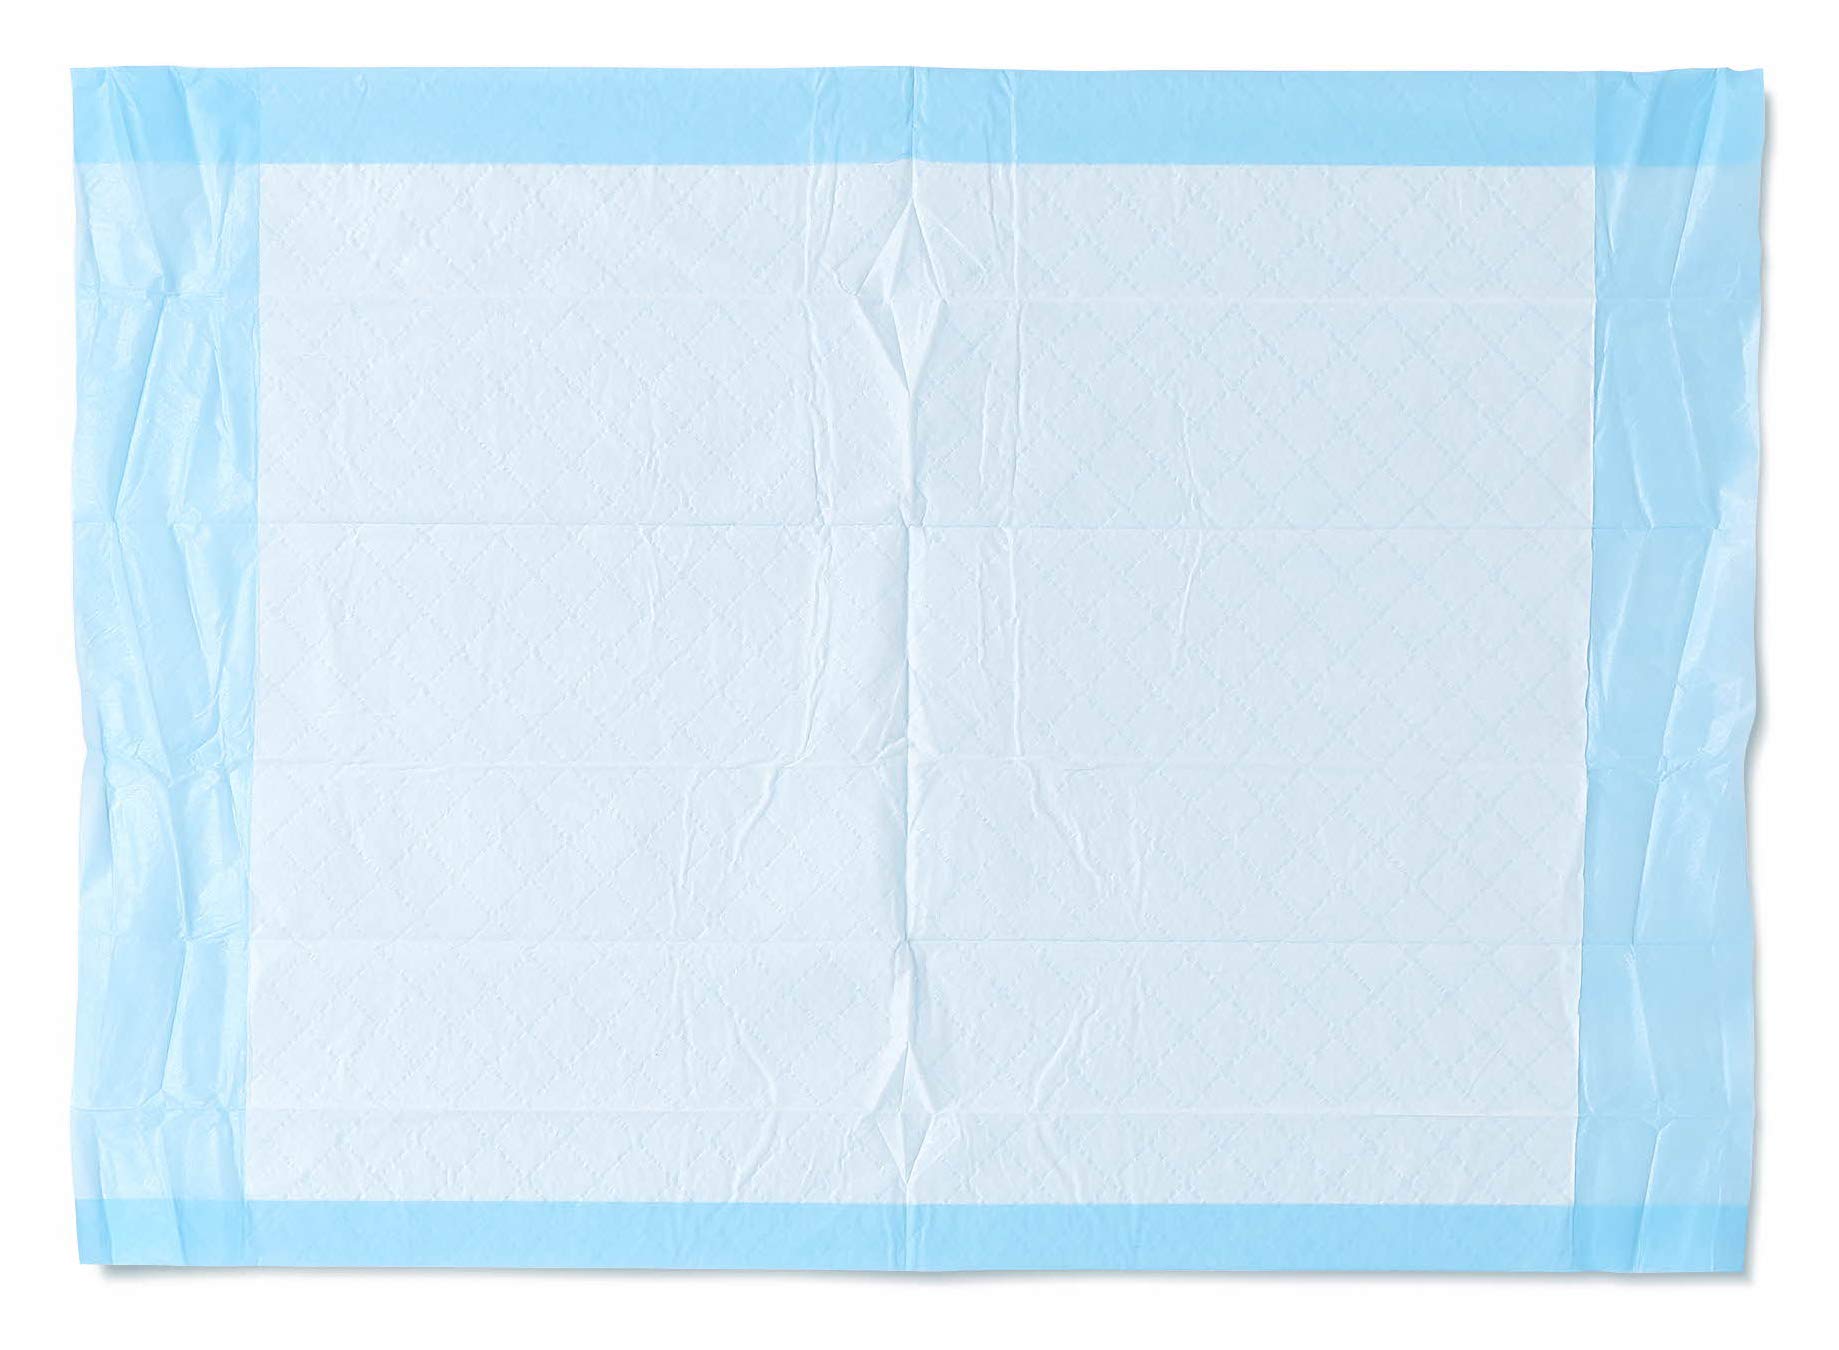 Medline Disposable Underpads 17 x 24 inch (100 Count), Baby Changing Pad for Changing Table, Small Puppy Pad, Pee Pad for Dogs, Ultra Lightweight Absorbency,Blue